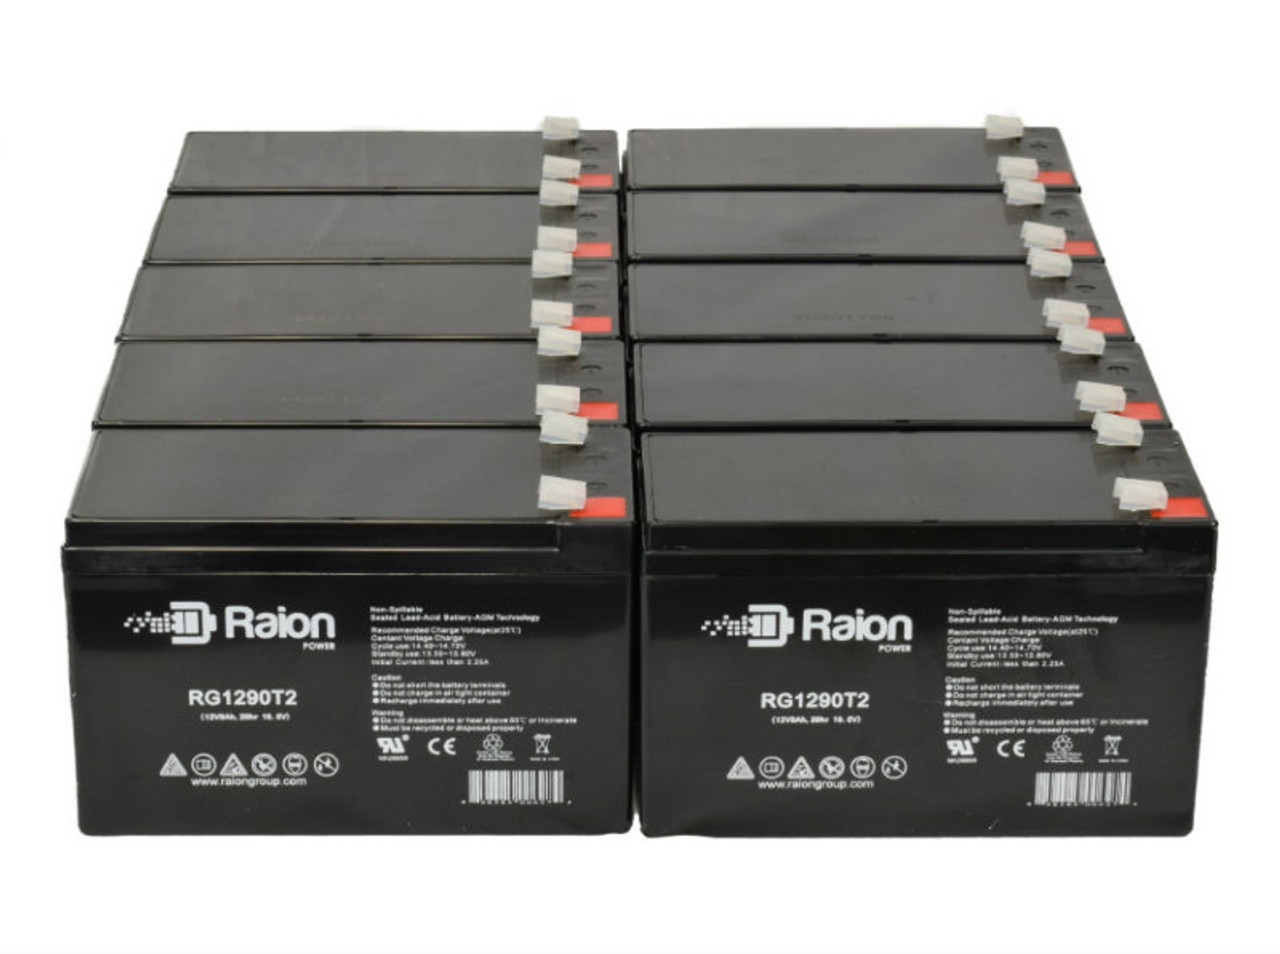 Raion Power Replacement 12V 9Ah Battery for Saft 47786101000 - 10 Pack